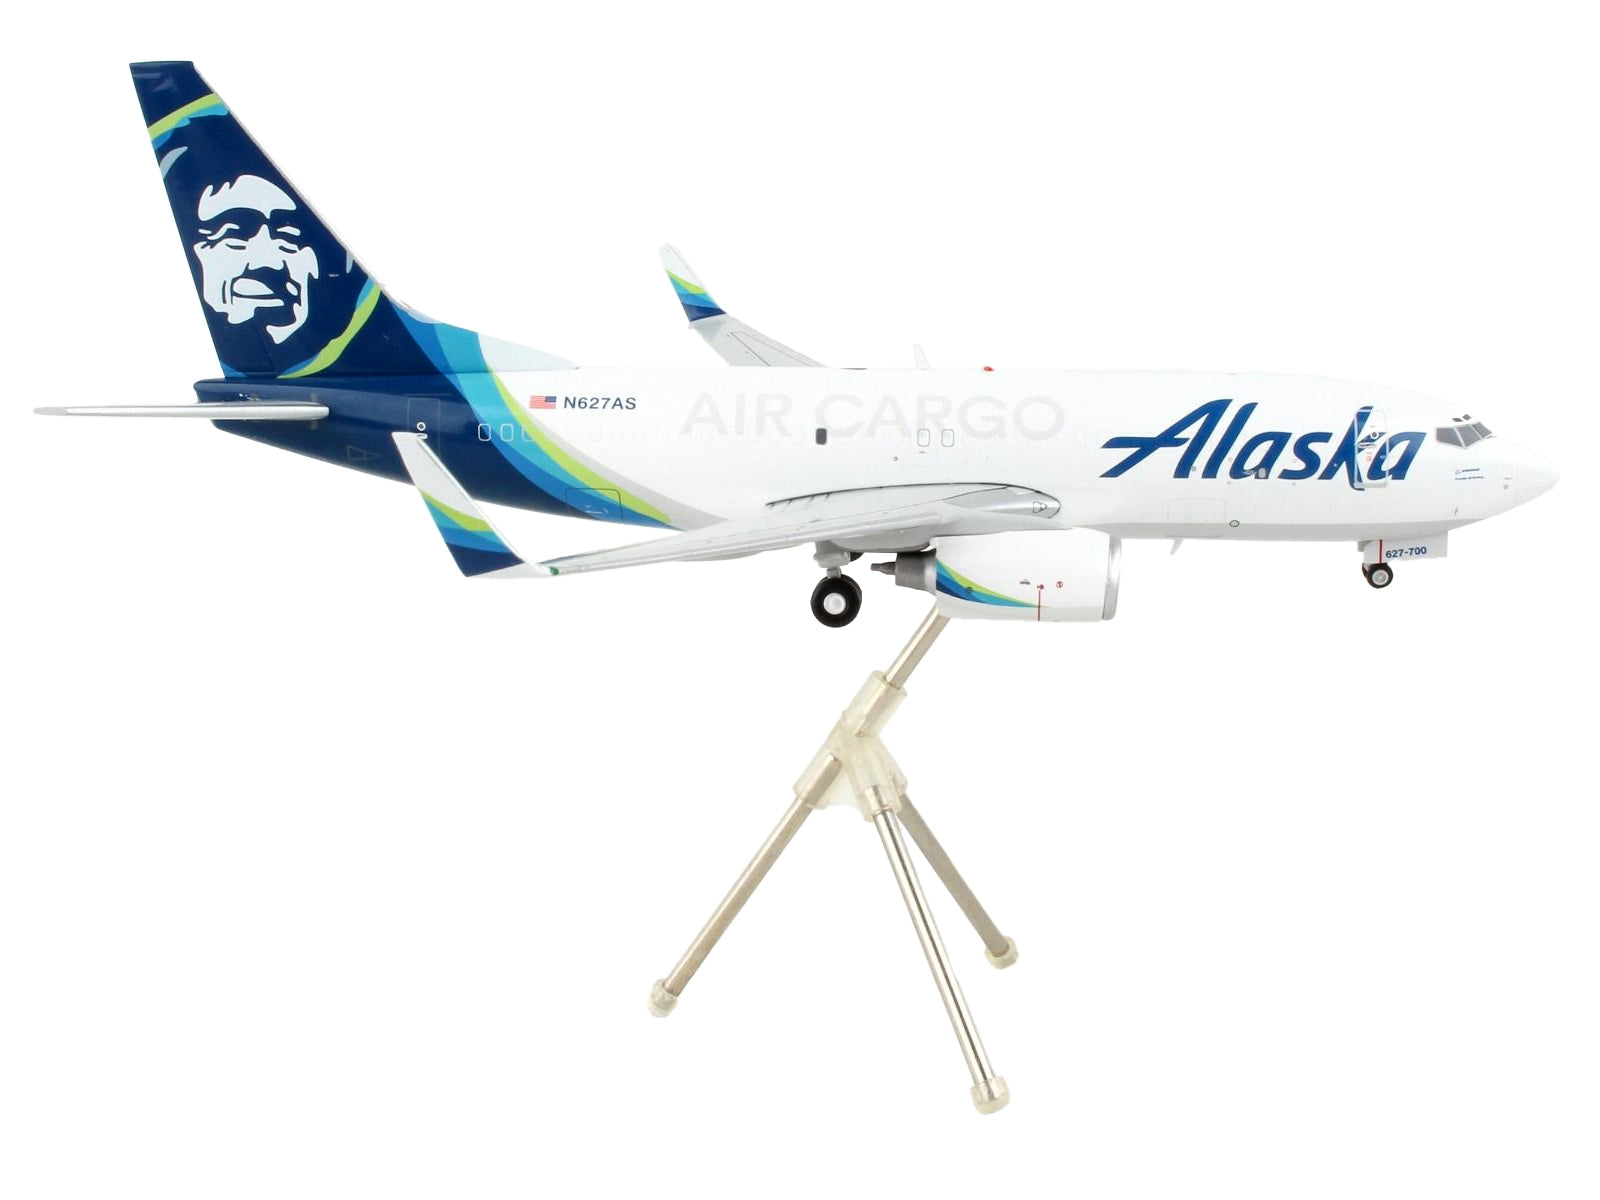 Boeing 737-700BDSF Commercial Aircraft "Alaska Air Cargo" White with Blue Tail "Gemini 200" Series 1/200 Diecast Model Airplane by GeminiJets